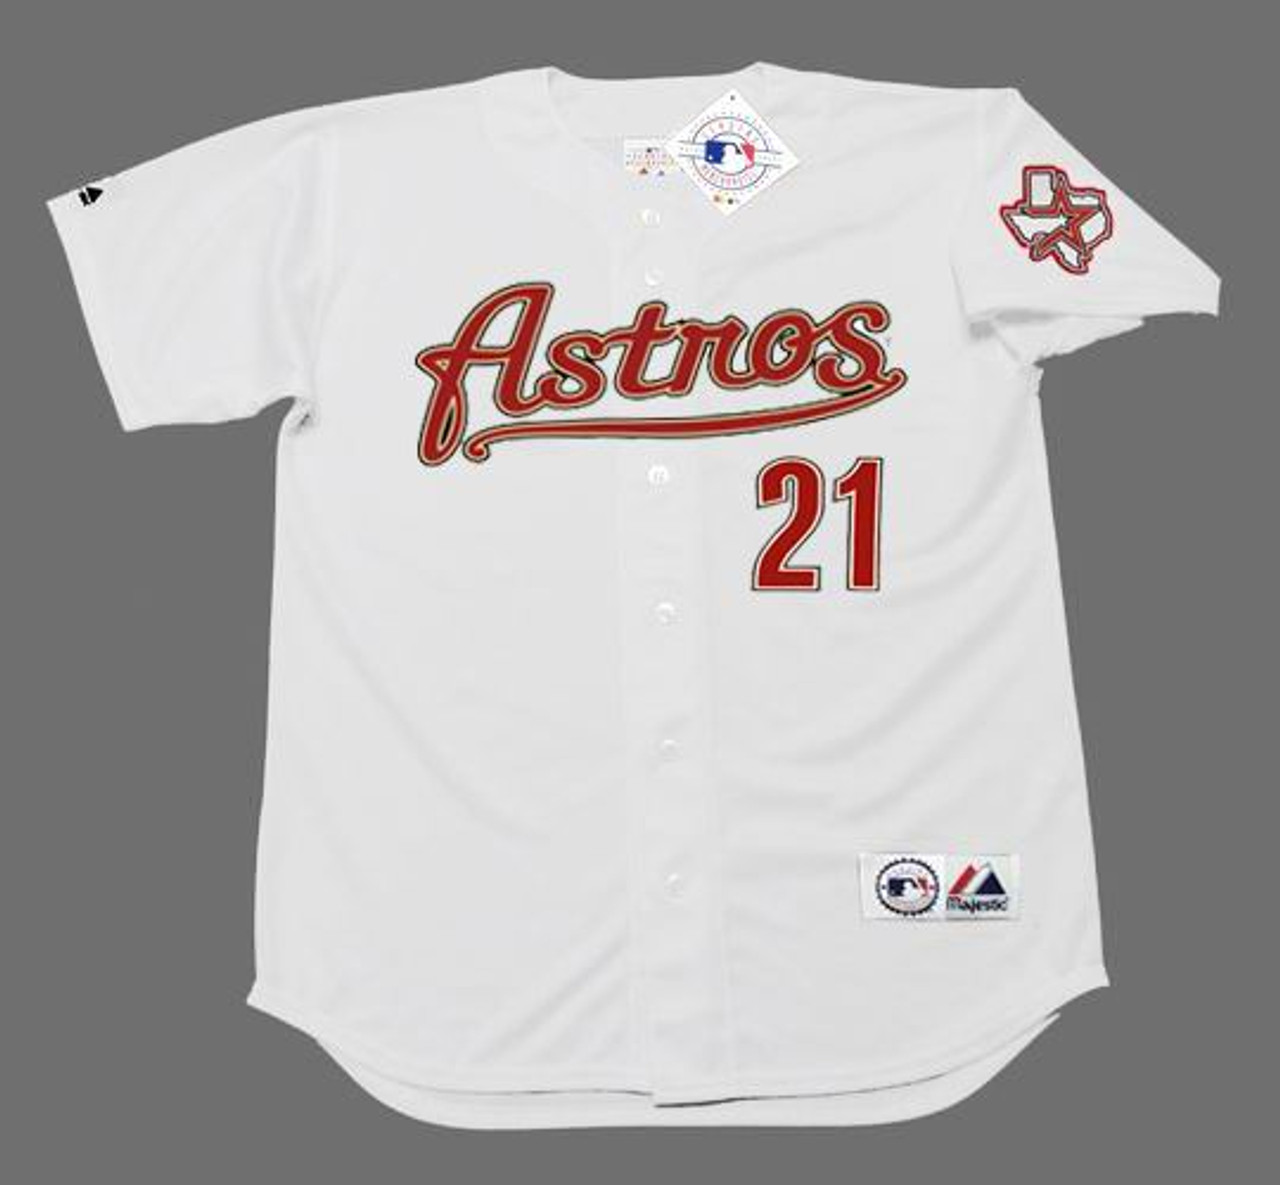 Authentic MLB Astros Throwback Pettitte Jersey